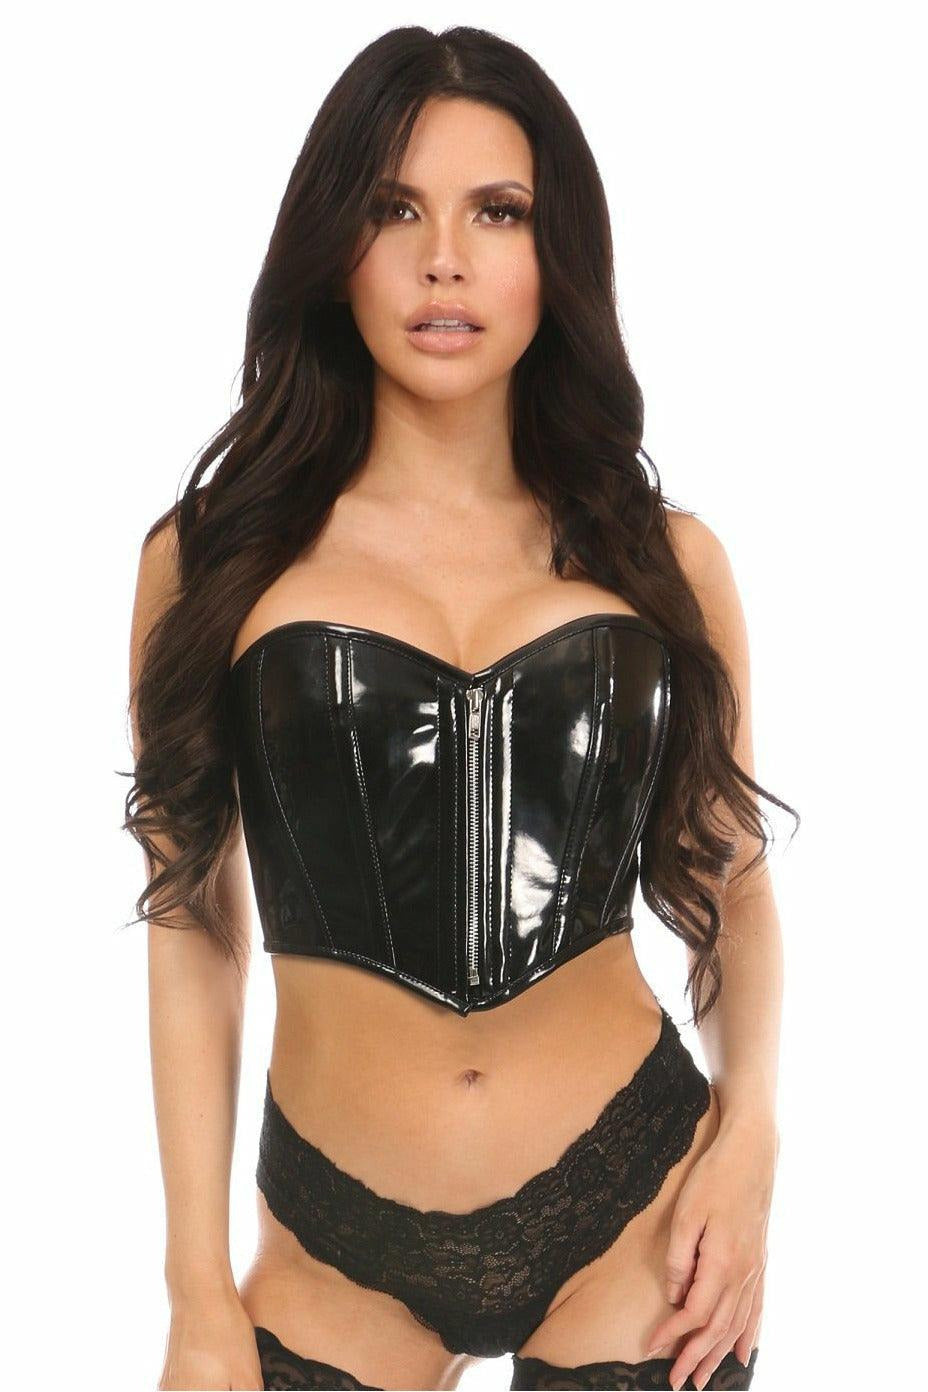 Top Drawer Black Patent Bustier with Zipper by Daisy Corsets in Size S, M, L, XL, 2X, 3X, 4X, 5X, or 6X